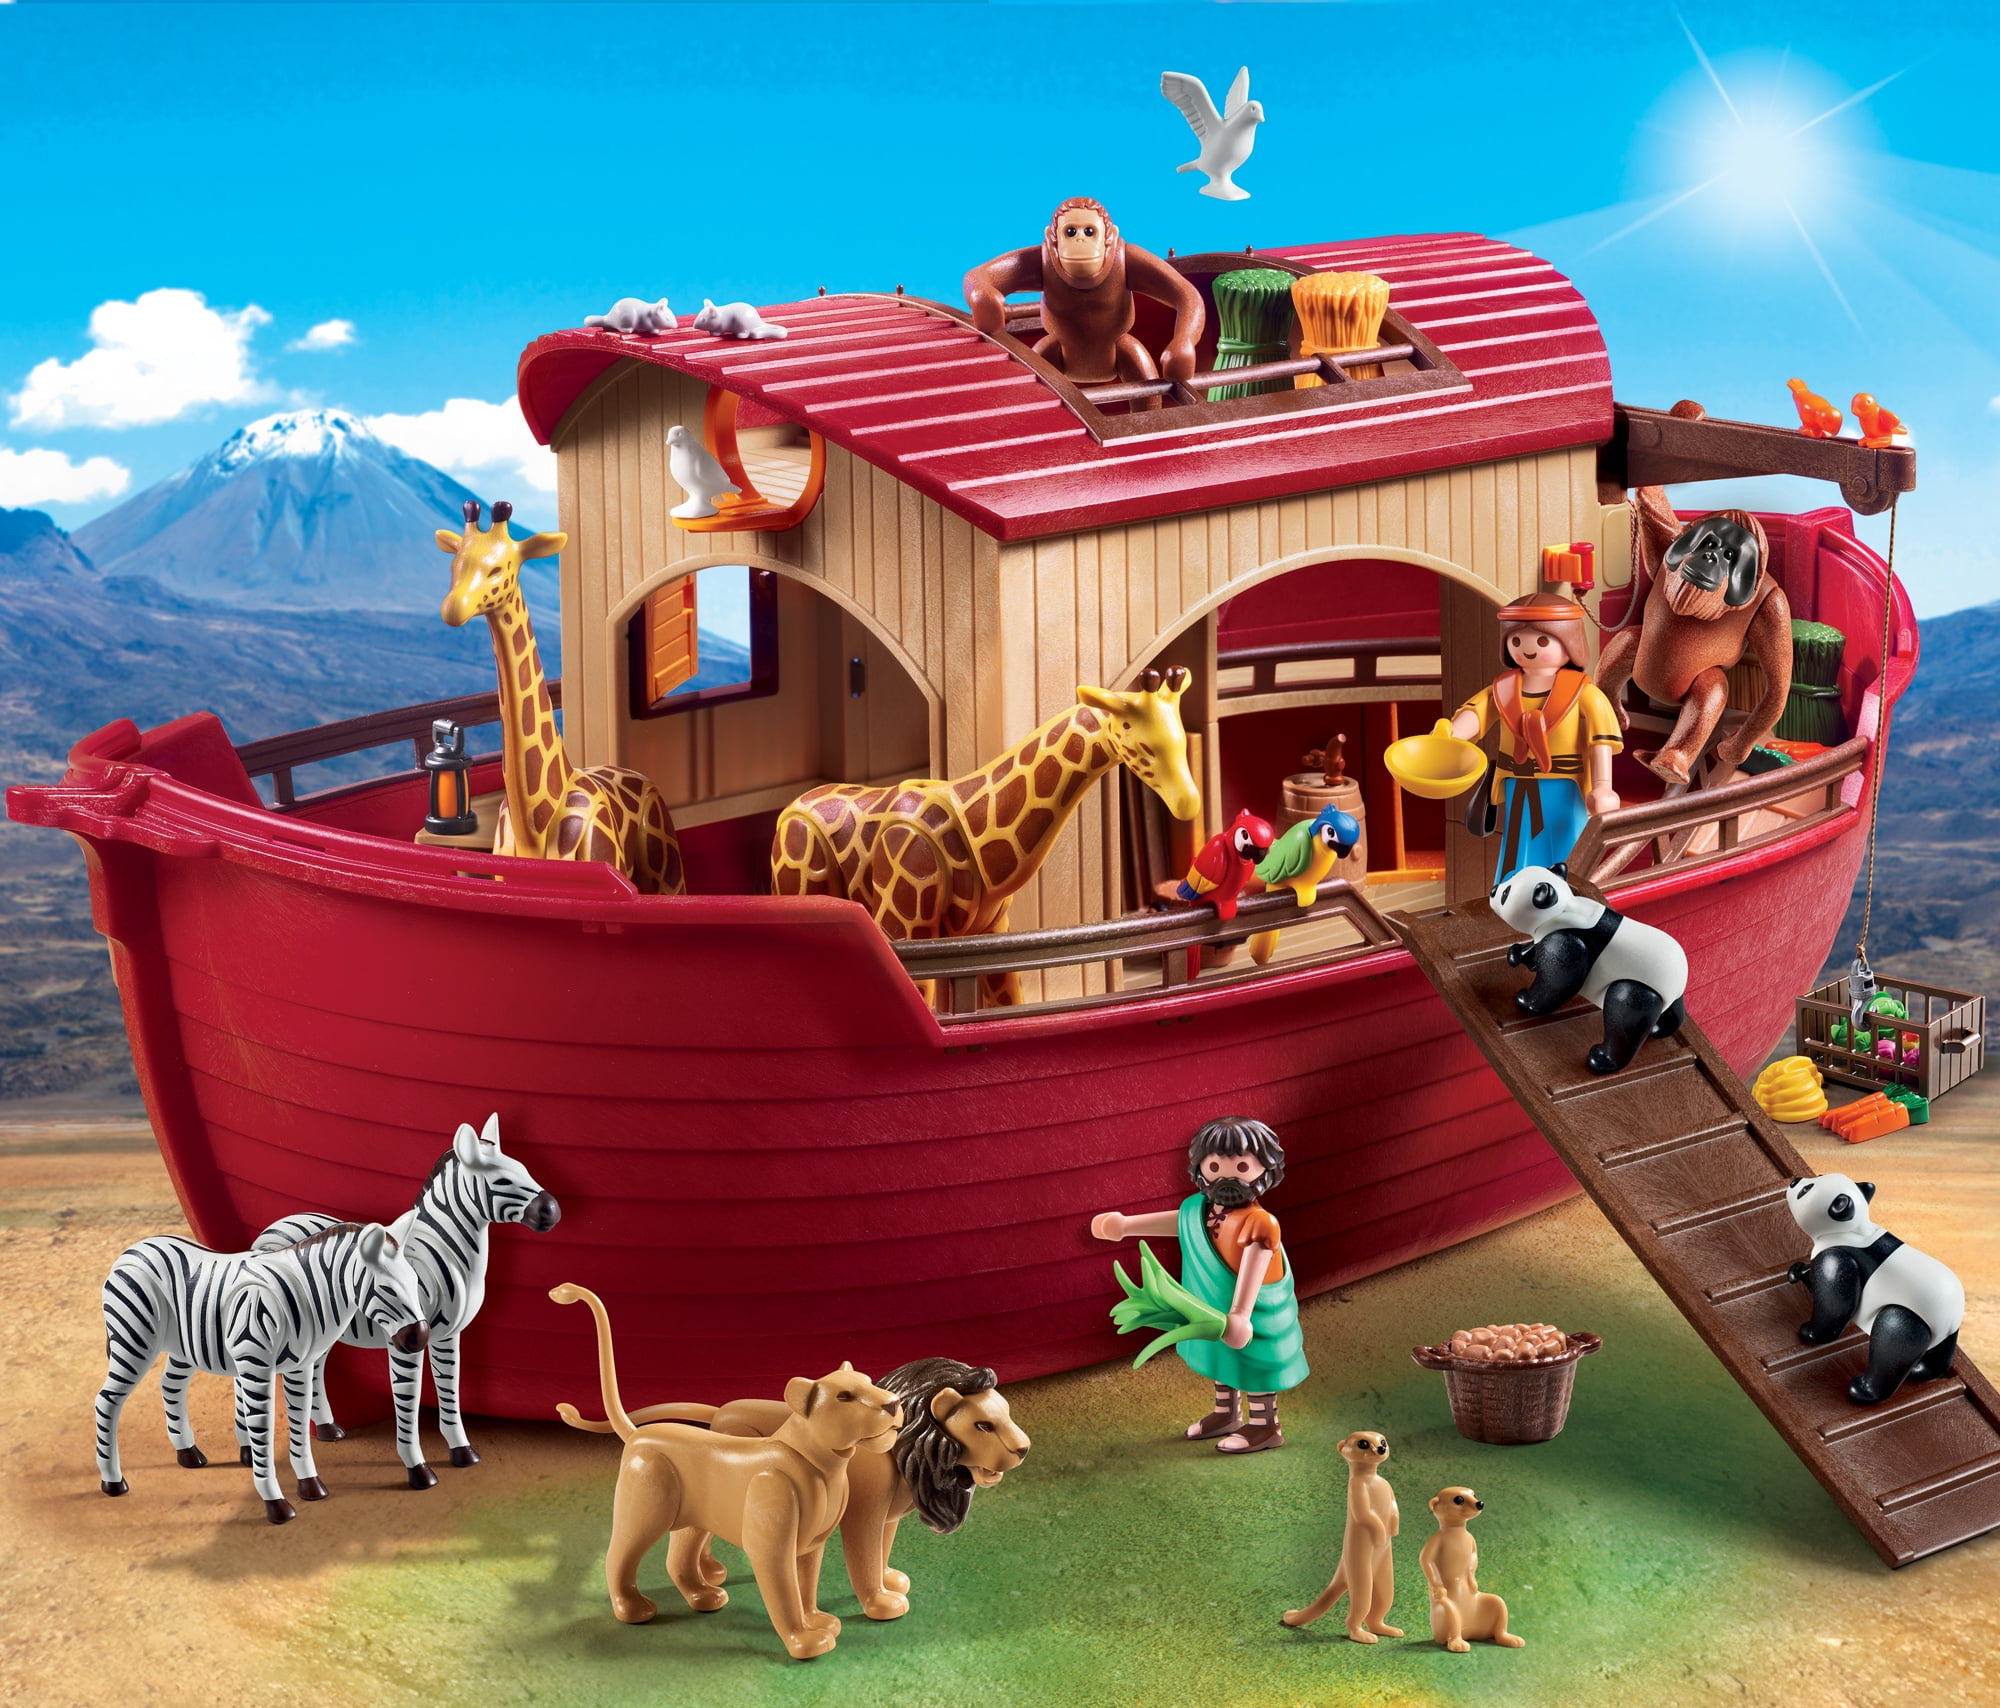 Playmobil zoo brown scale foredeck noah's ark 3255 5276 9373 